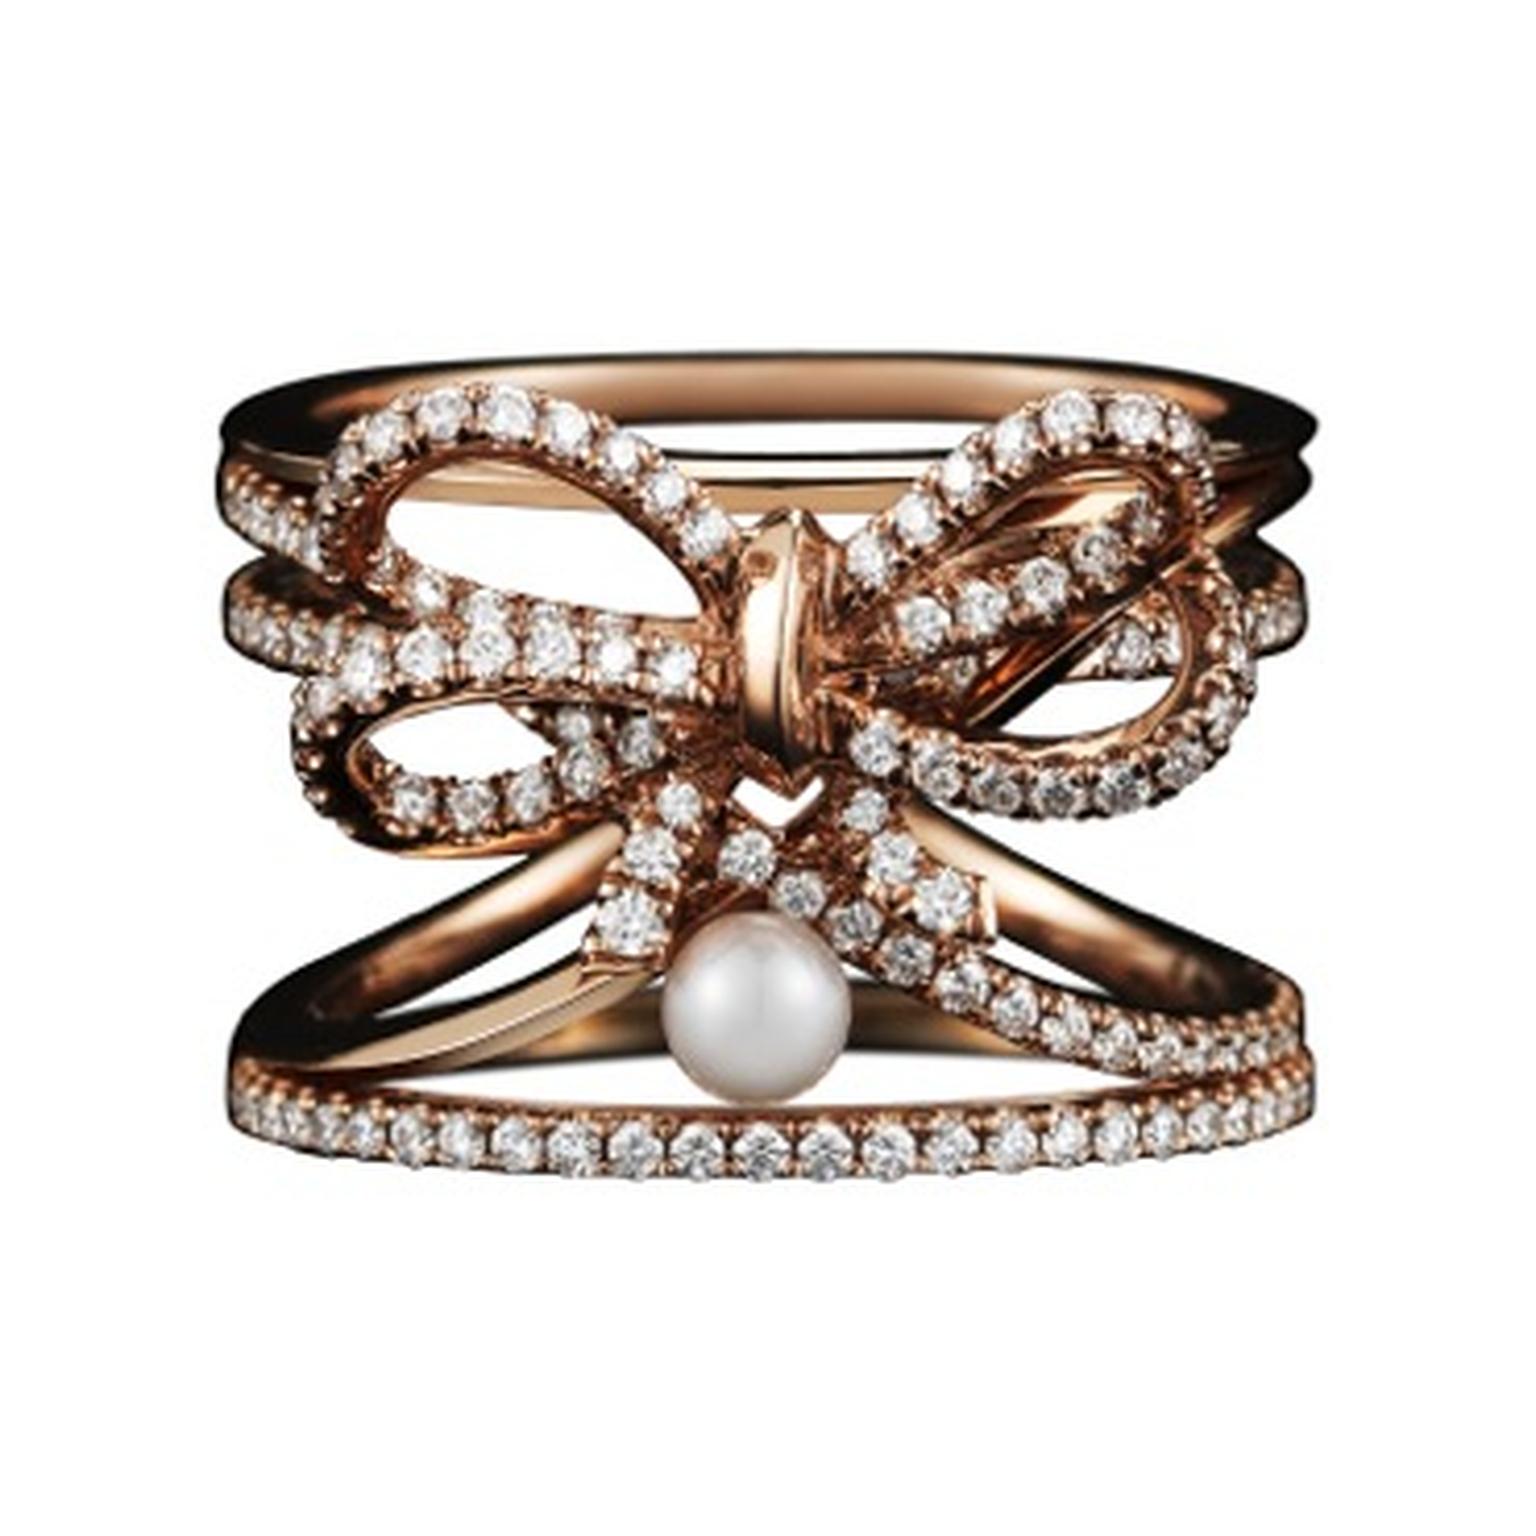 Alexandra Mor_Contemporary Diamond Bow and Pearl Ring (18K Rose Gold)_High Res_White BG_Top View.jpg